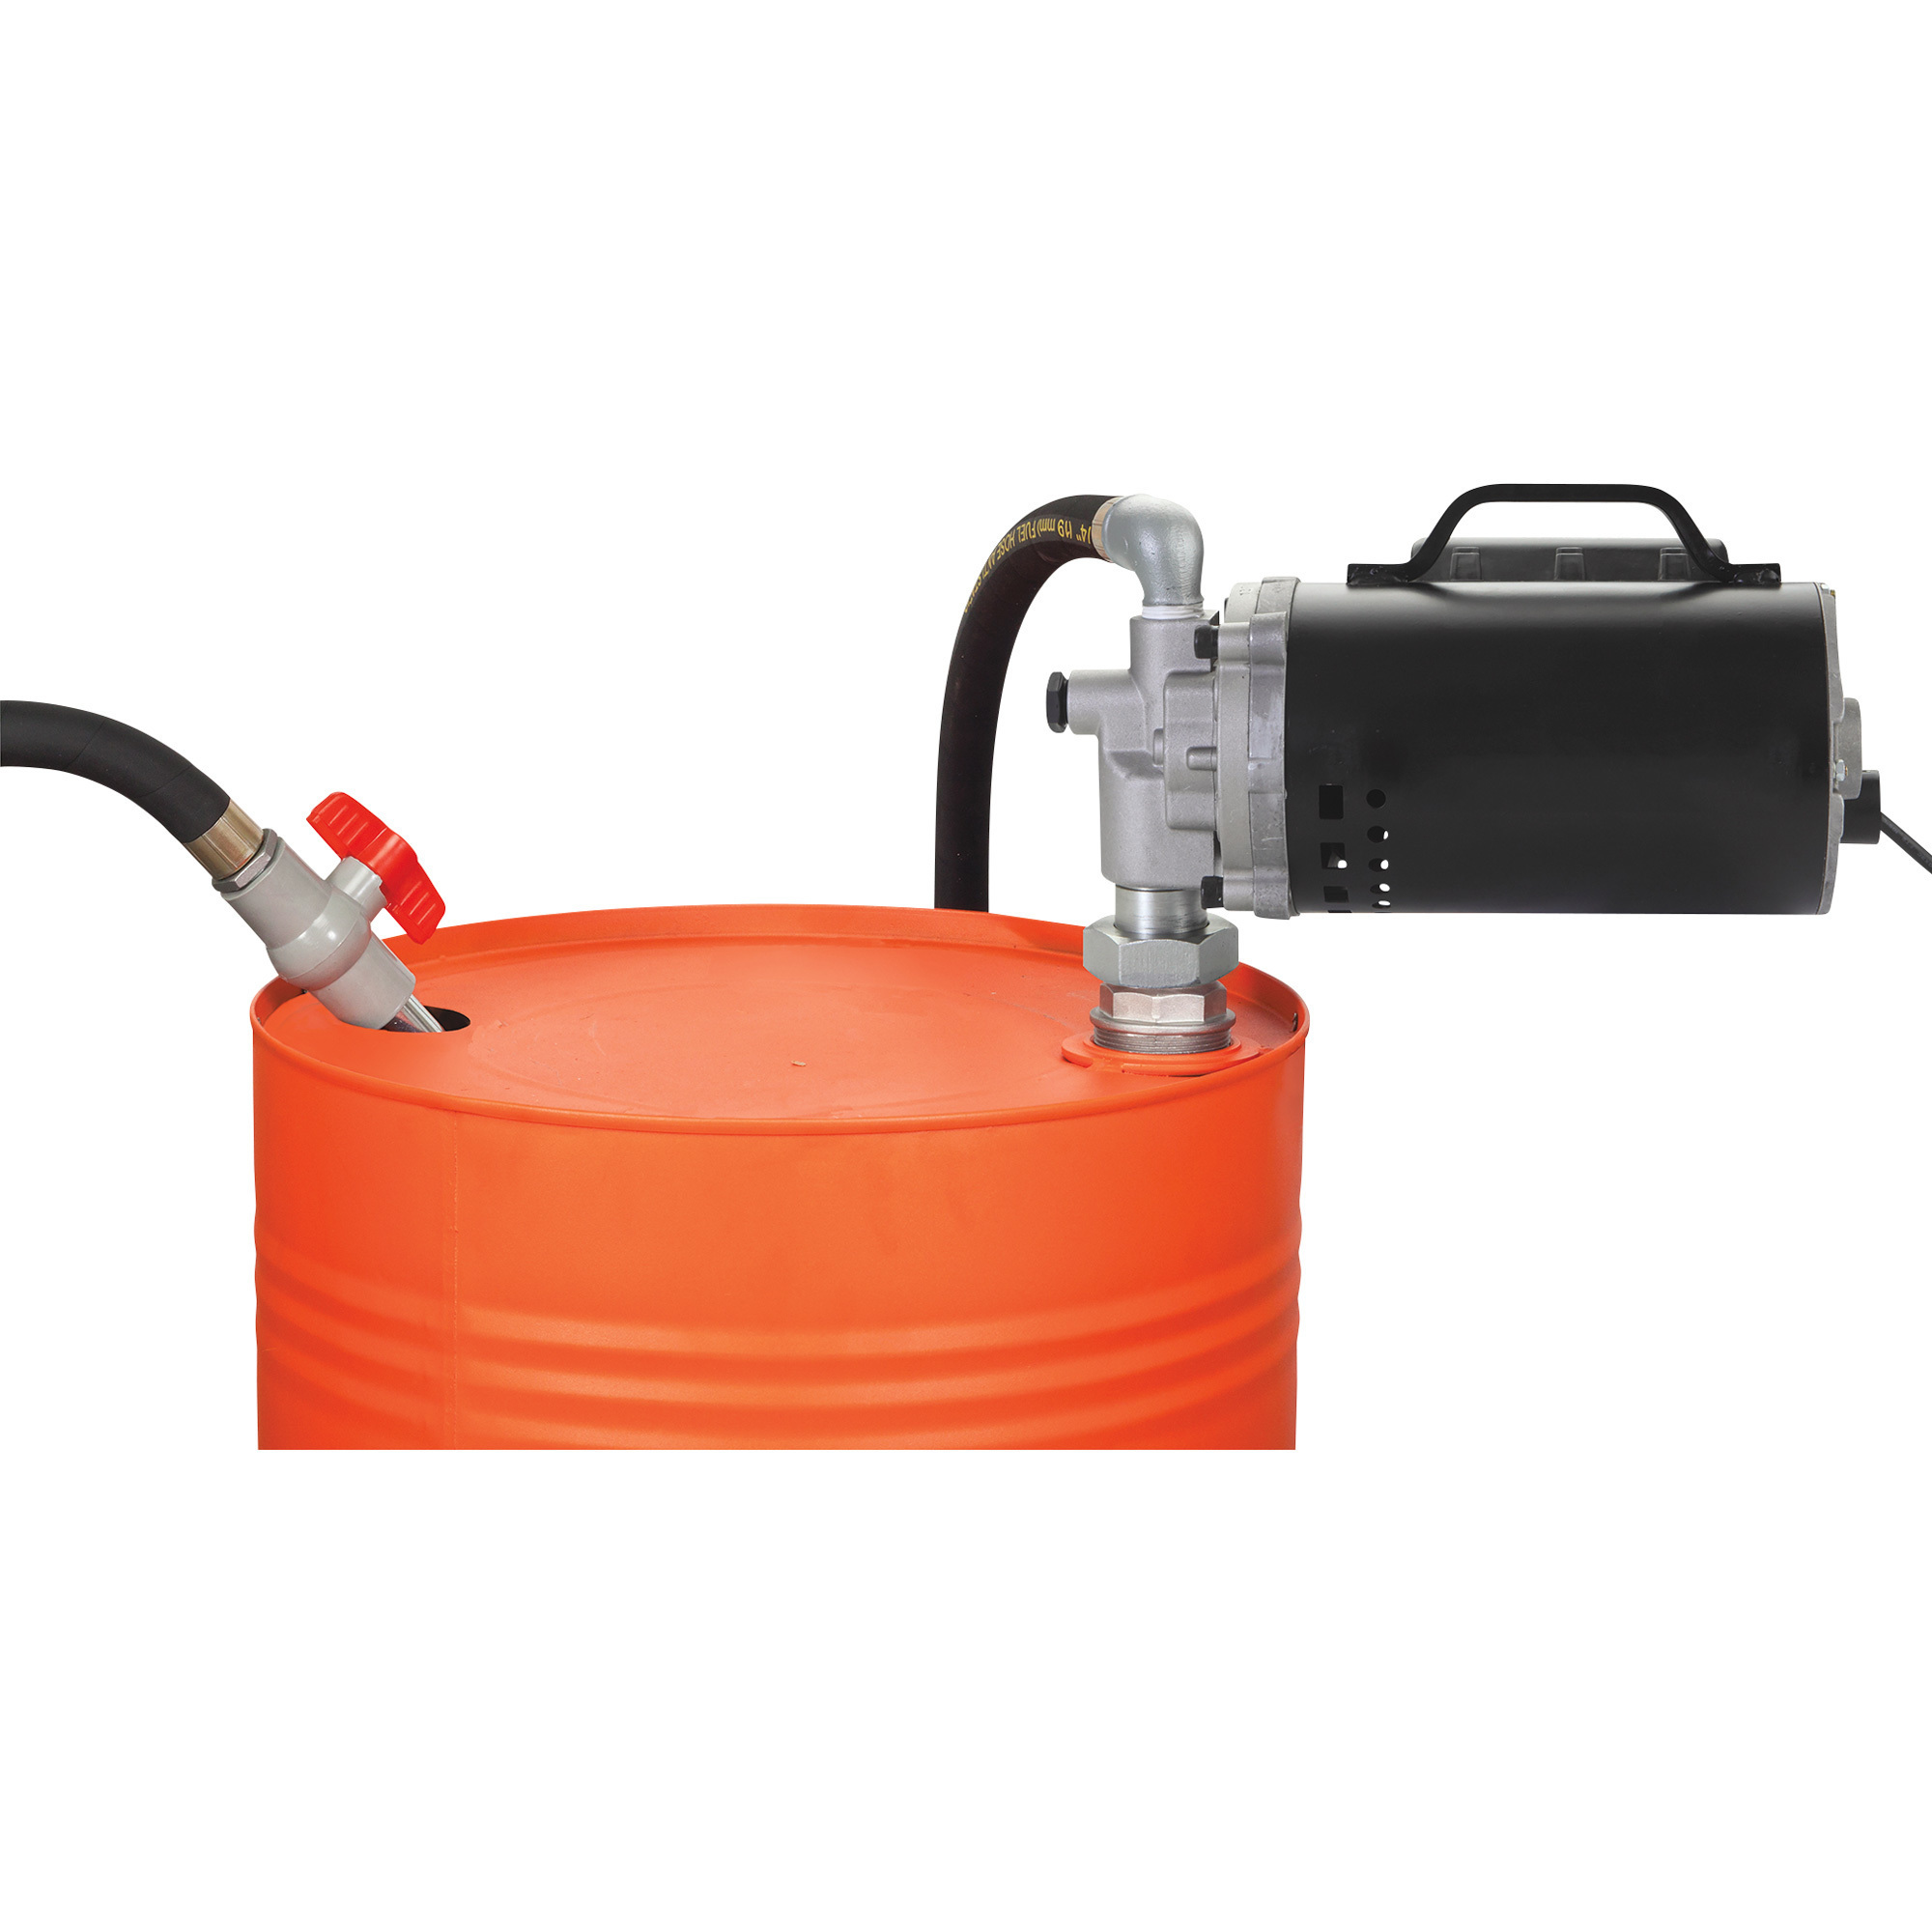 Gear driven 115 volt DC fuel pump with an aluminum die cast body and 12'  discharge hose with nozzle